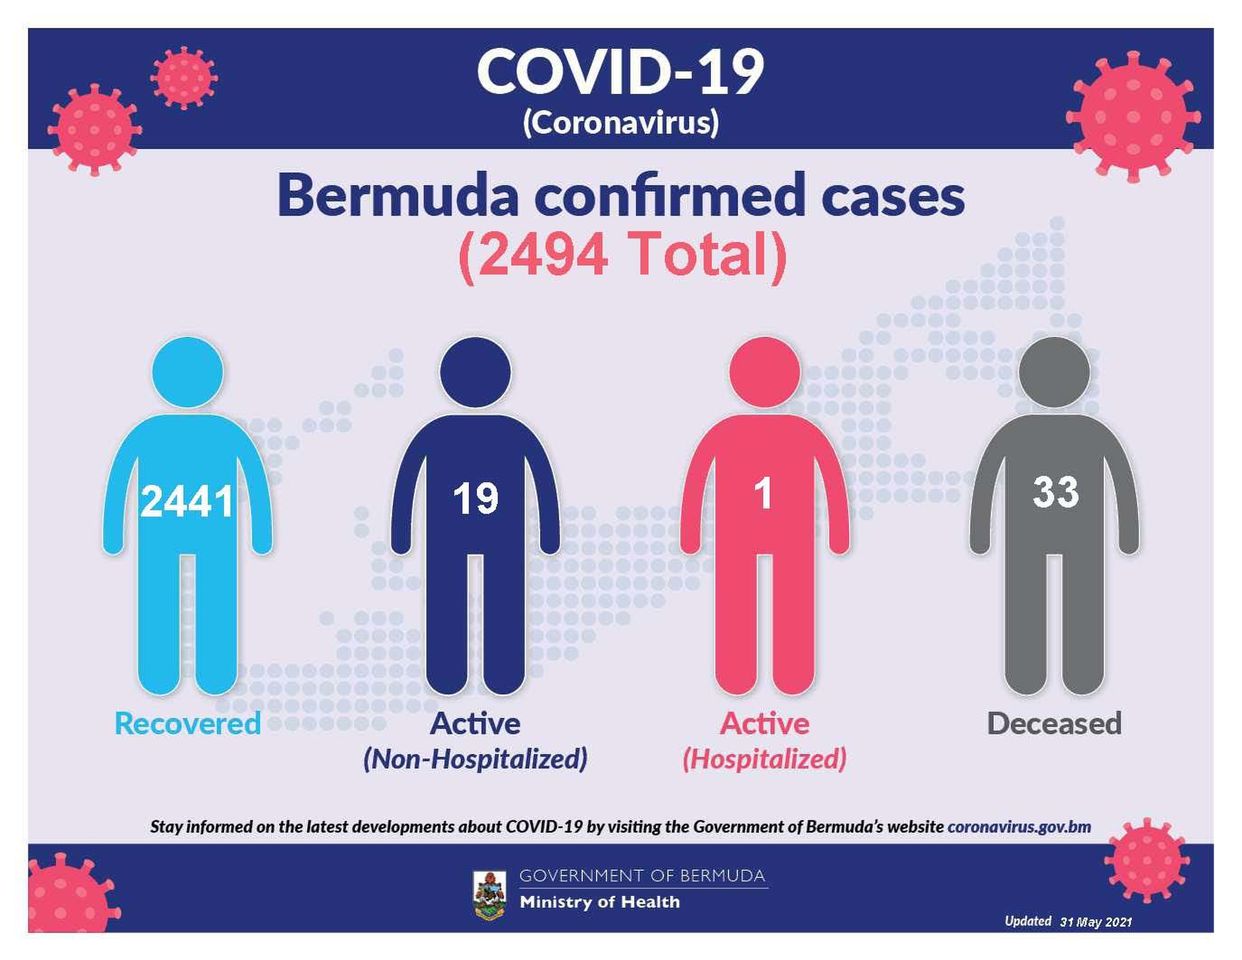 Bermuda reports 3 new COVID-19 cases, 31 May 2021